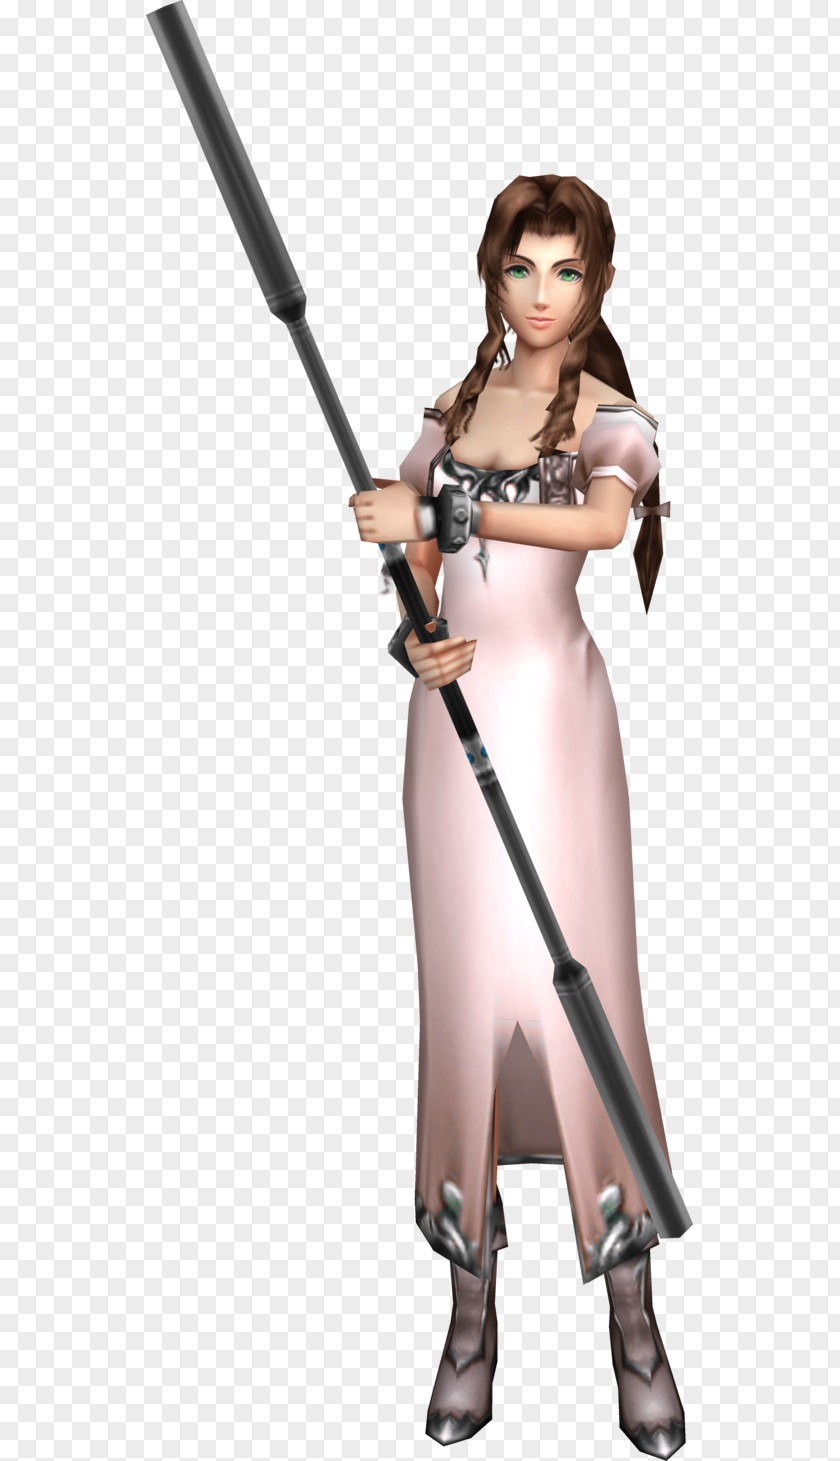 Weapon The Woman Warrior Spear Fiction Character PNG